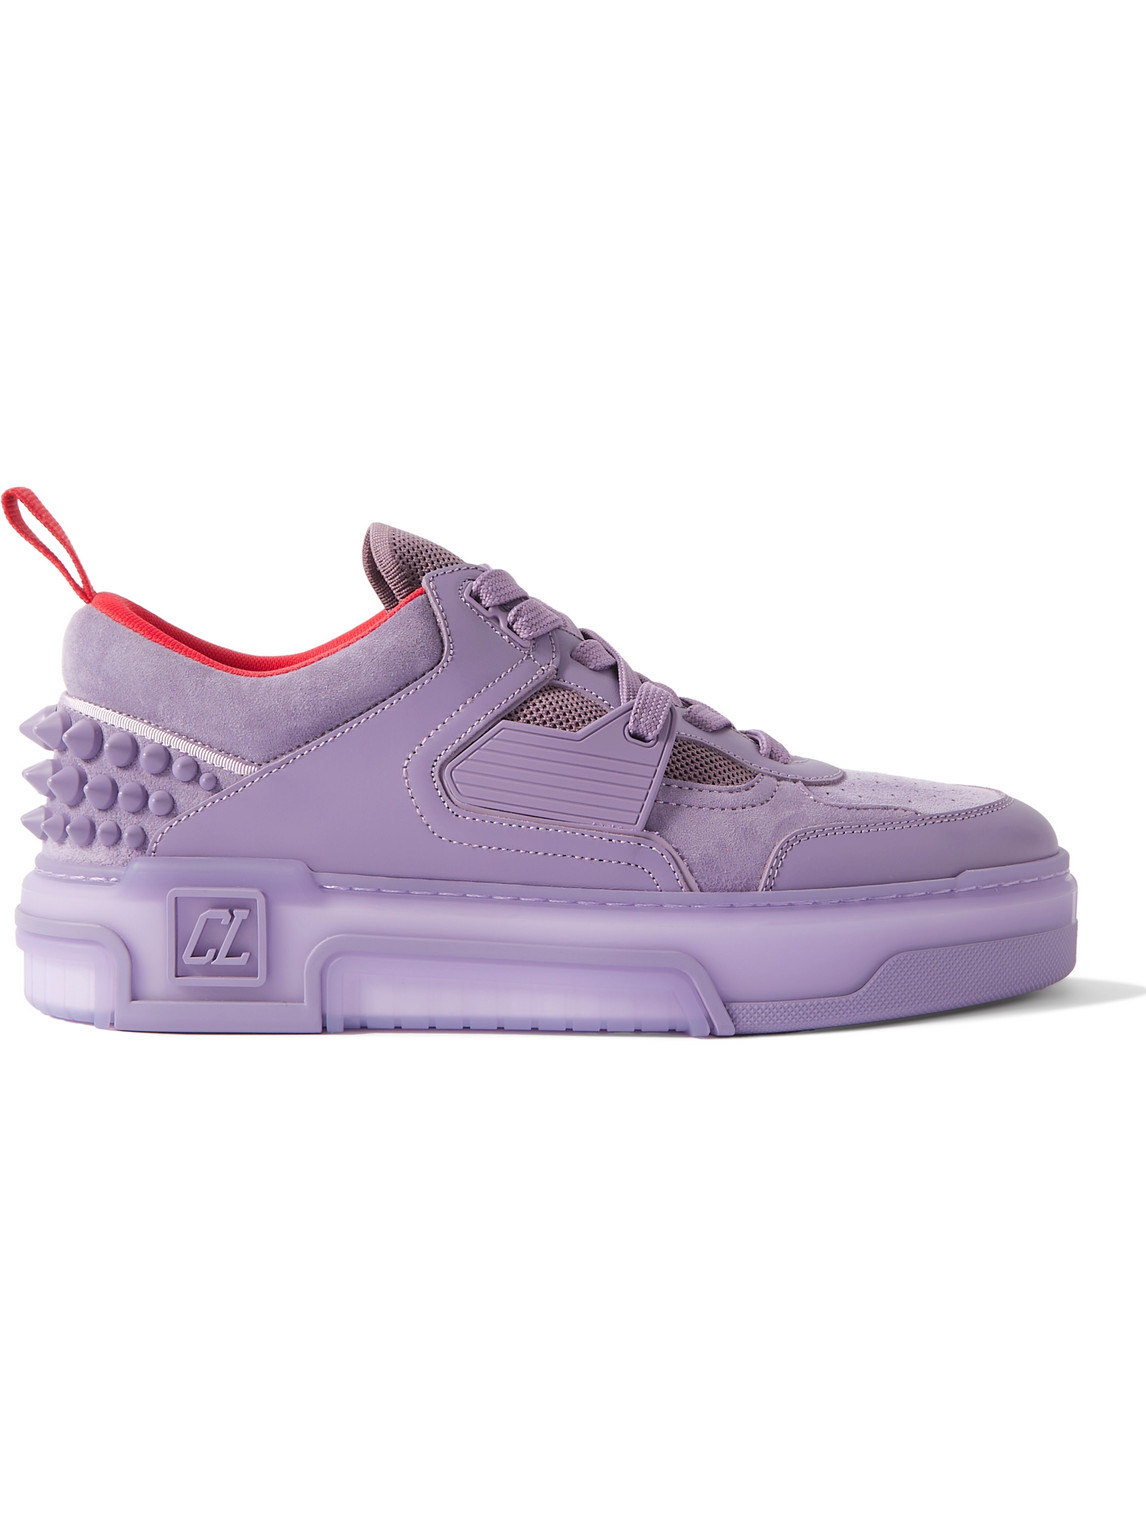 Christian Louboutin Astroloubi Spiked Leather, Suede And Mesh Sneakers In Purple